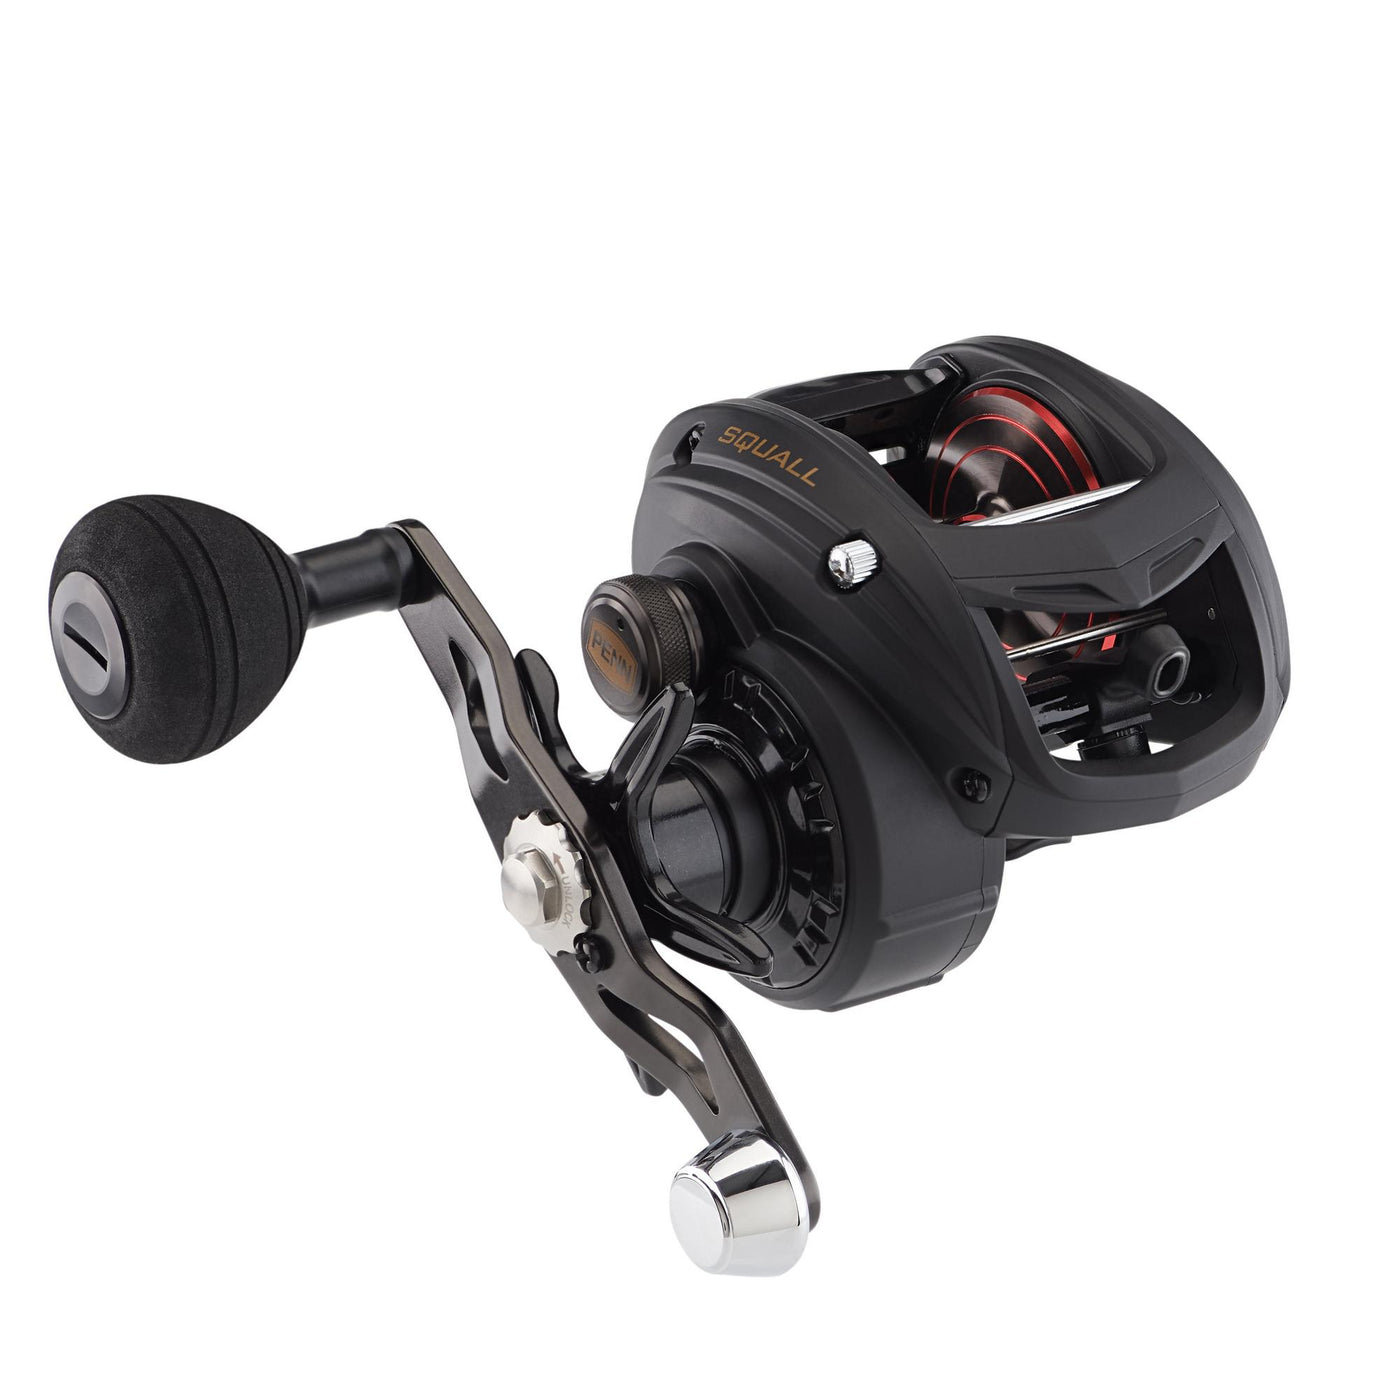 Penn Squall Low Profile Baitcasting Conventional Reels – White